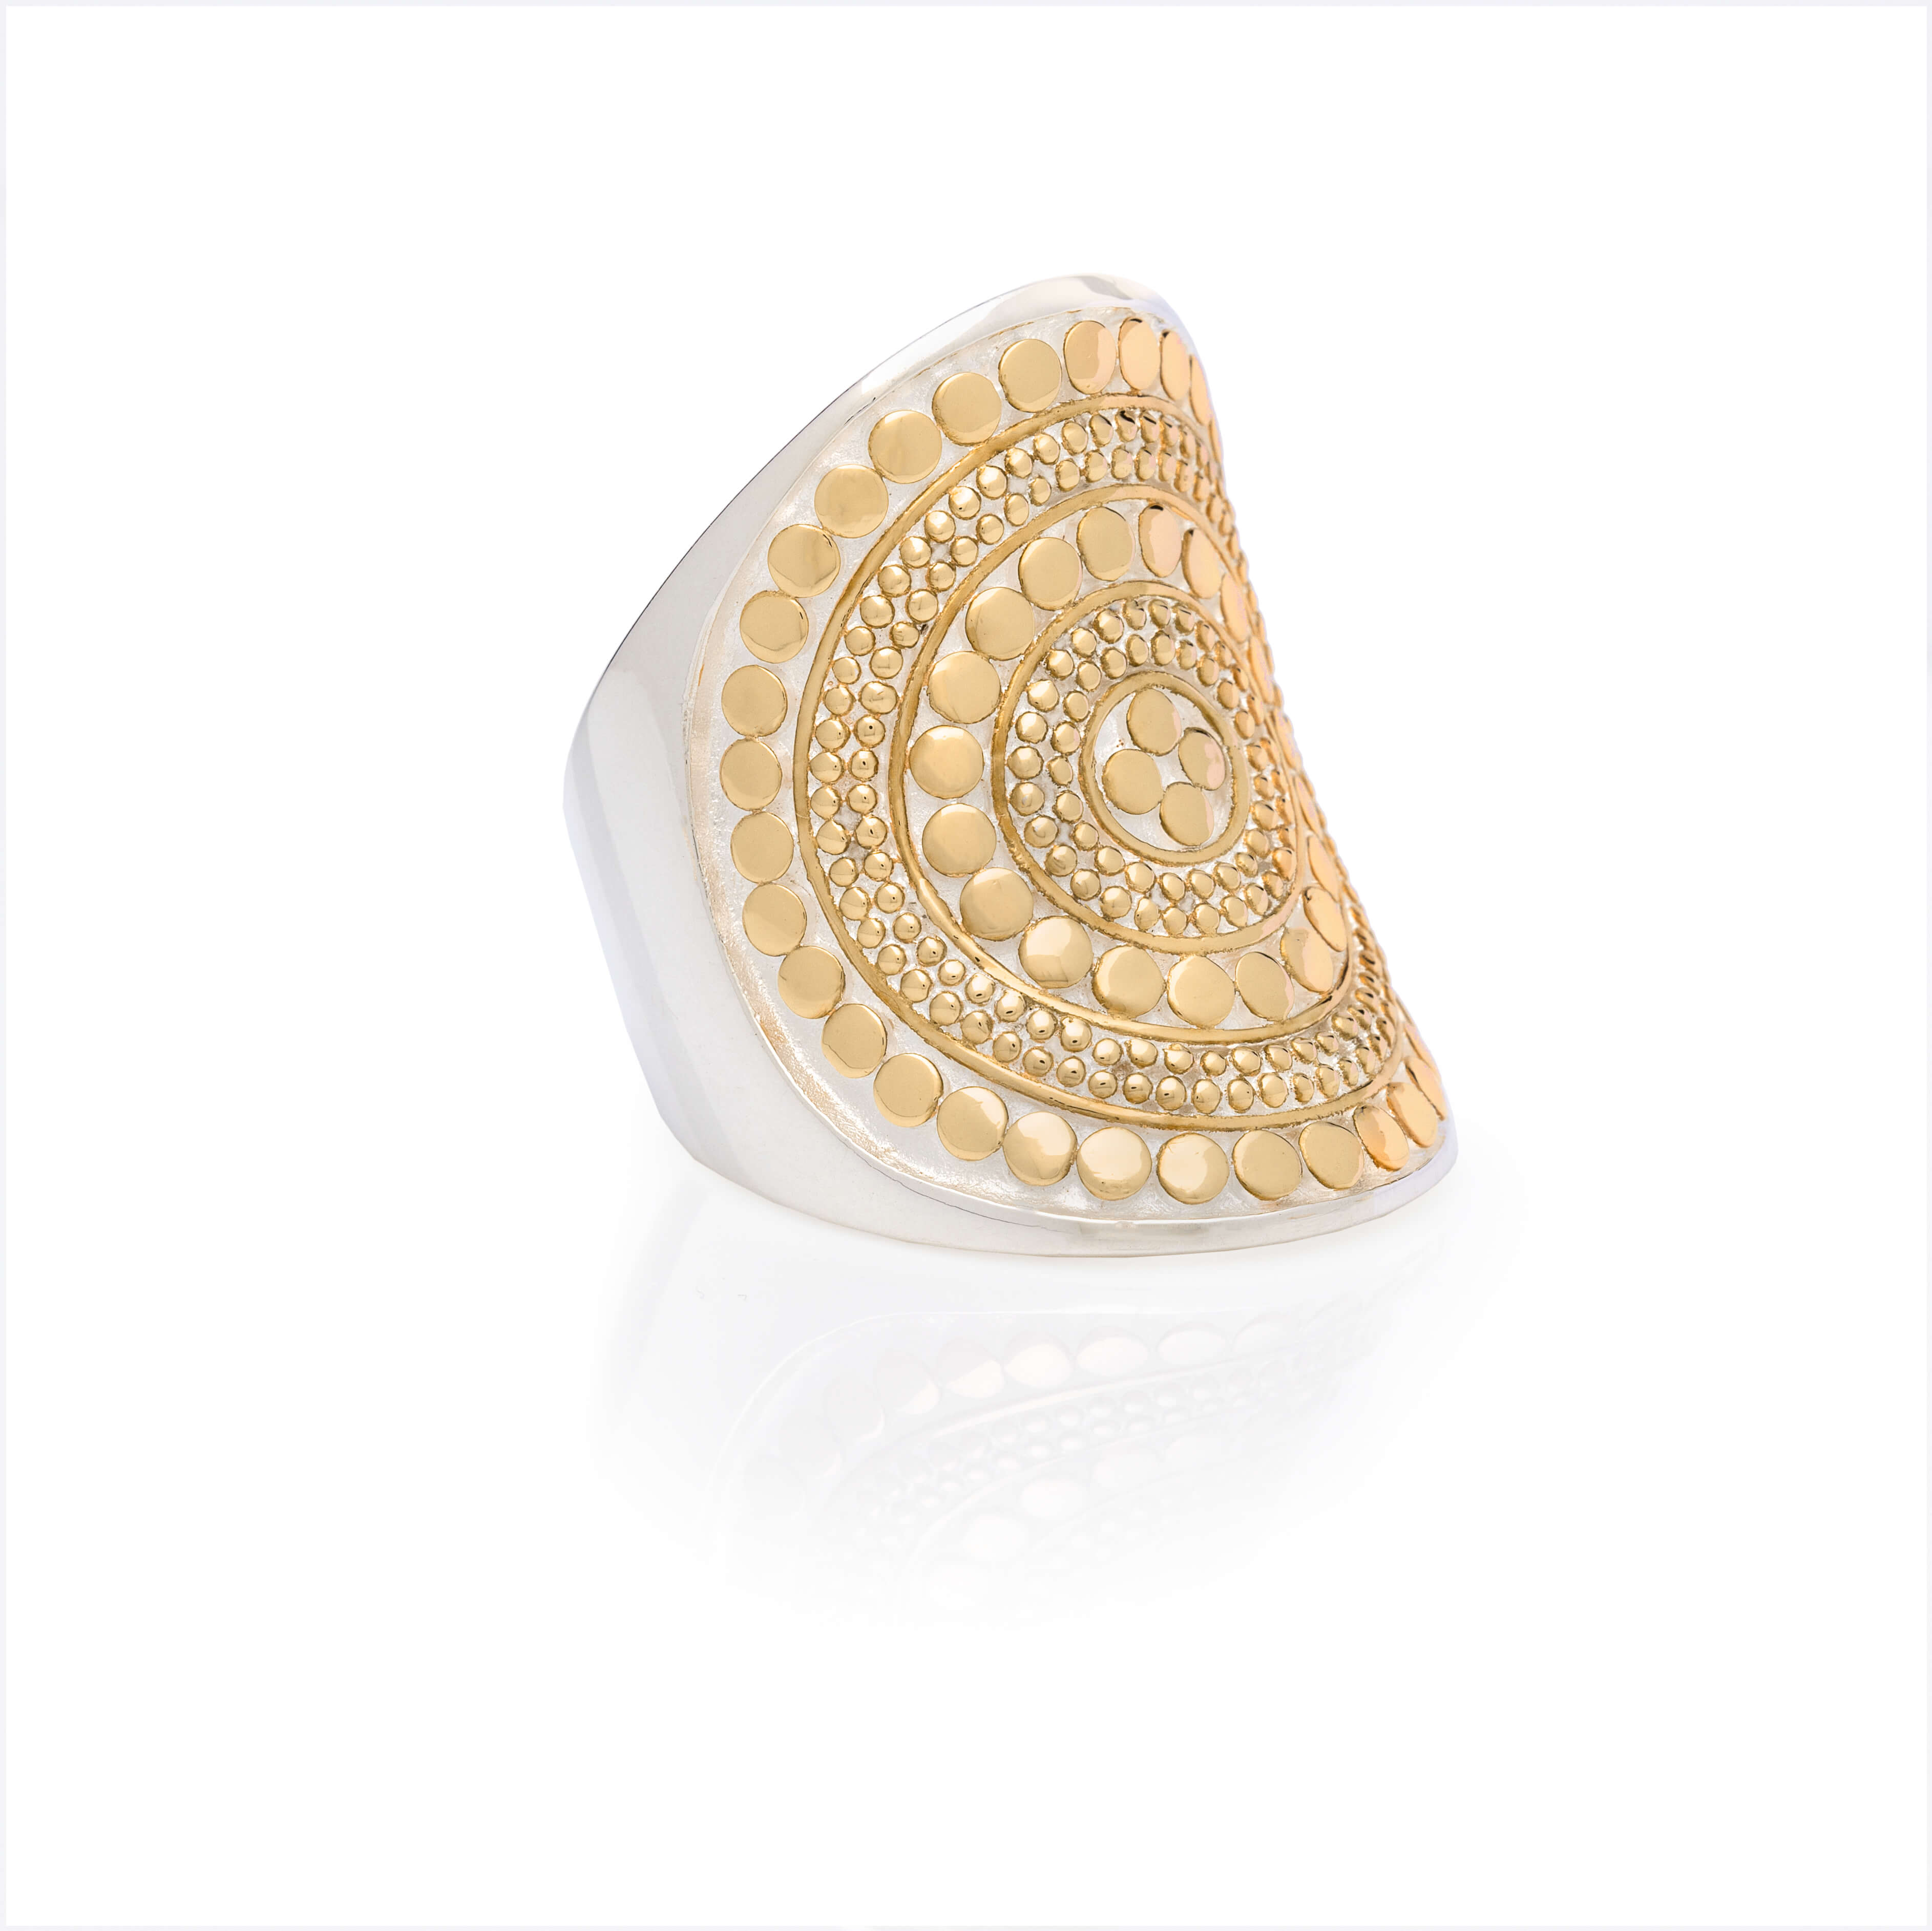 AB 2700R gold and silver large oval ring